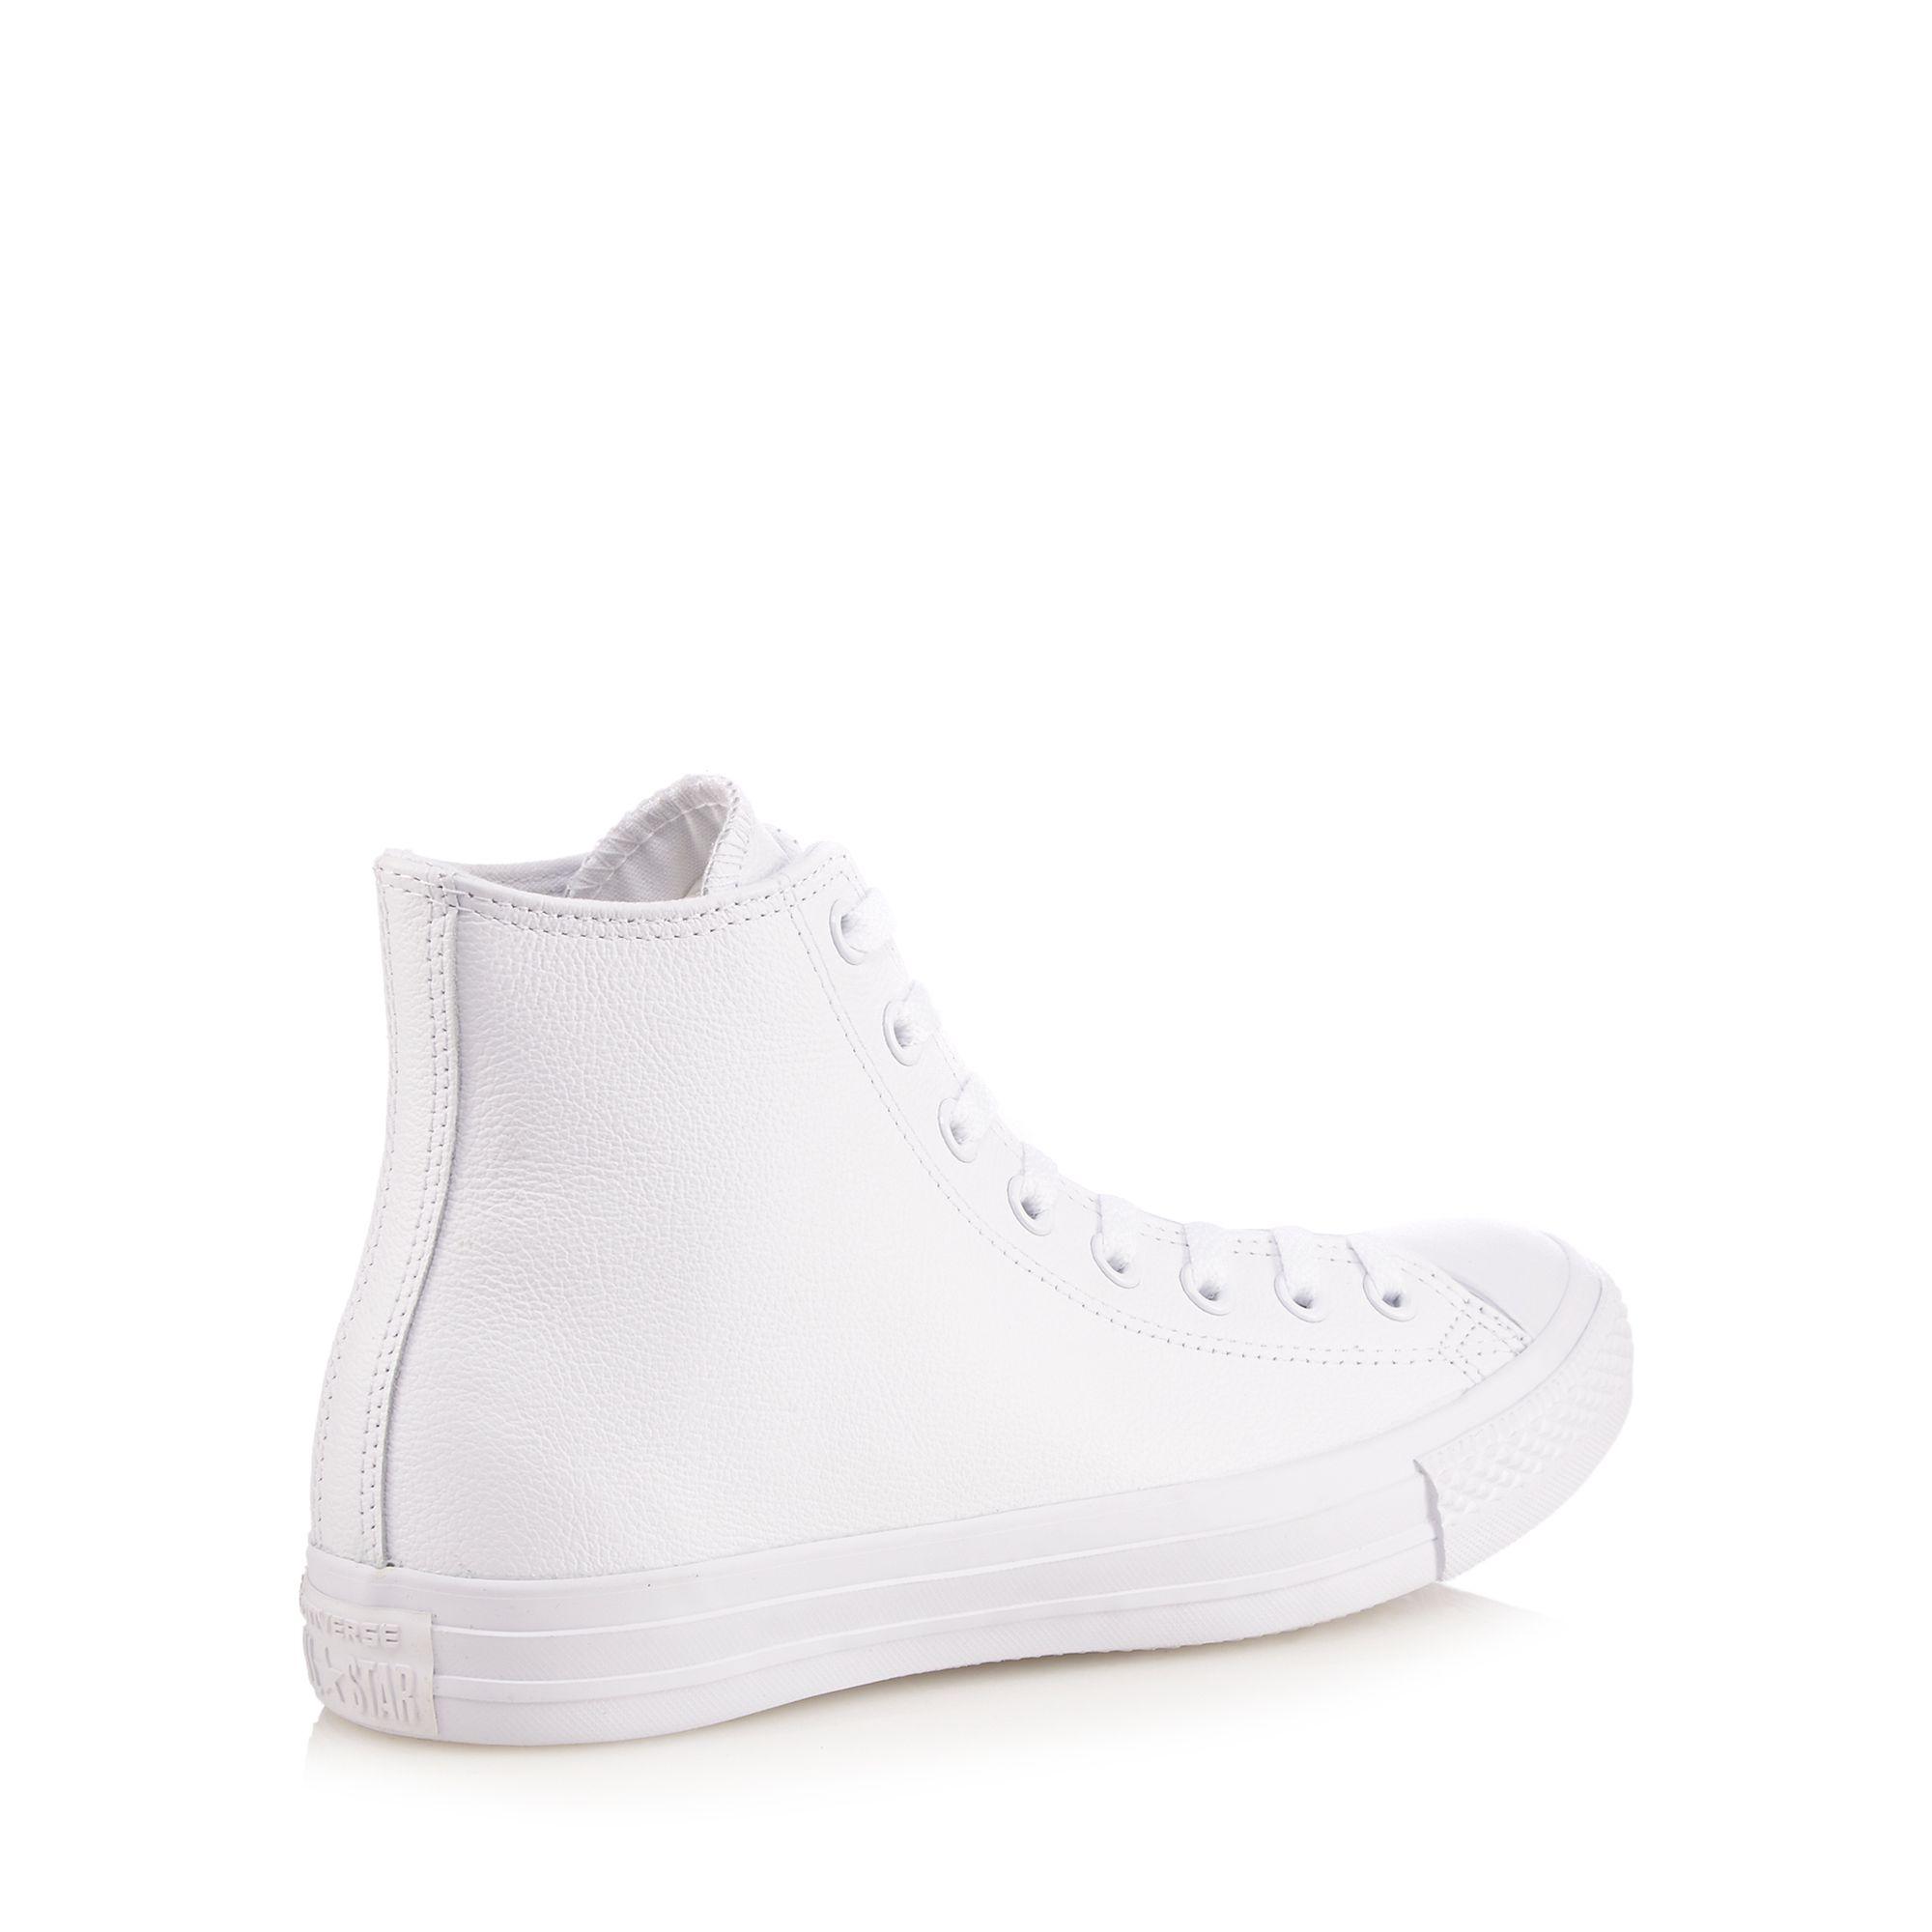 converse white ankle shoes